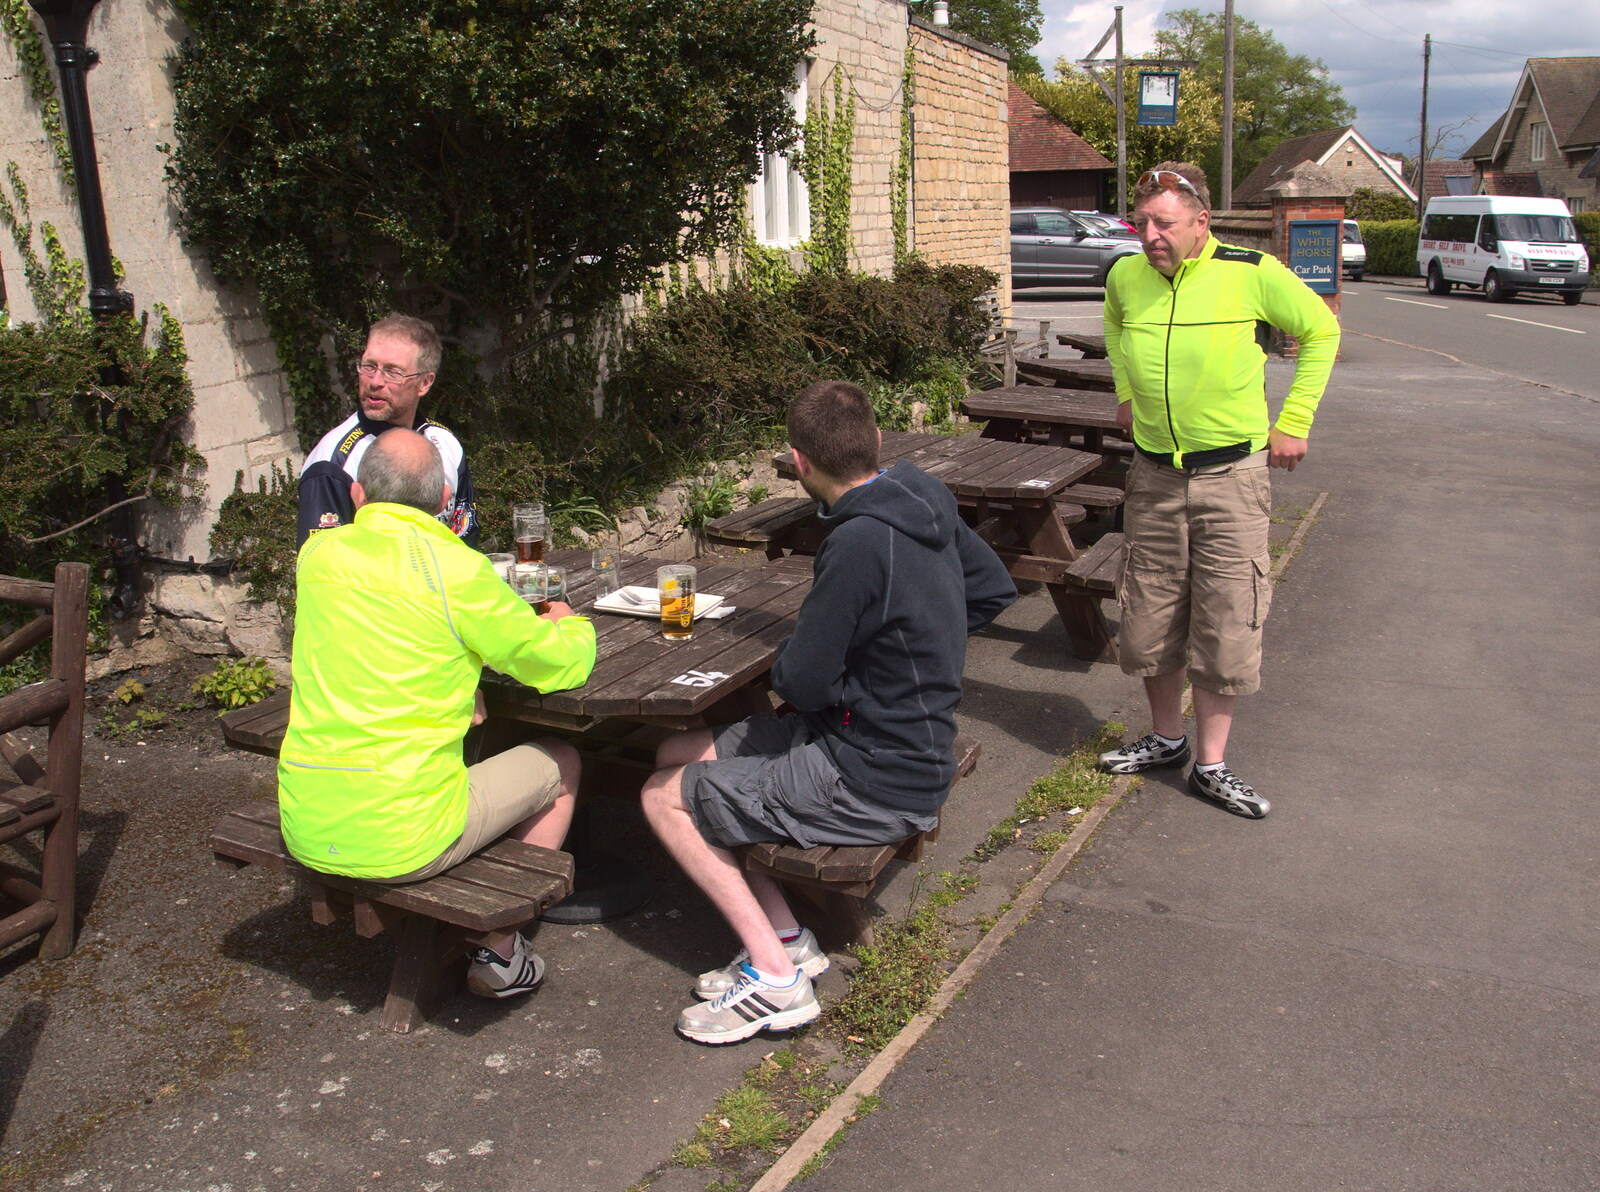 The lads outside the White Horse from The BSCC Weekend Away, Lyddington, Rutland - 9th May 2015